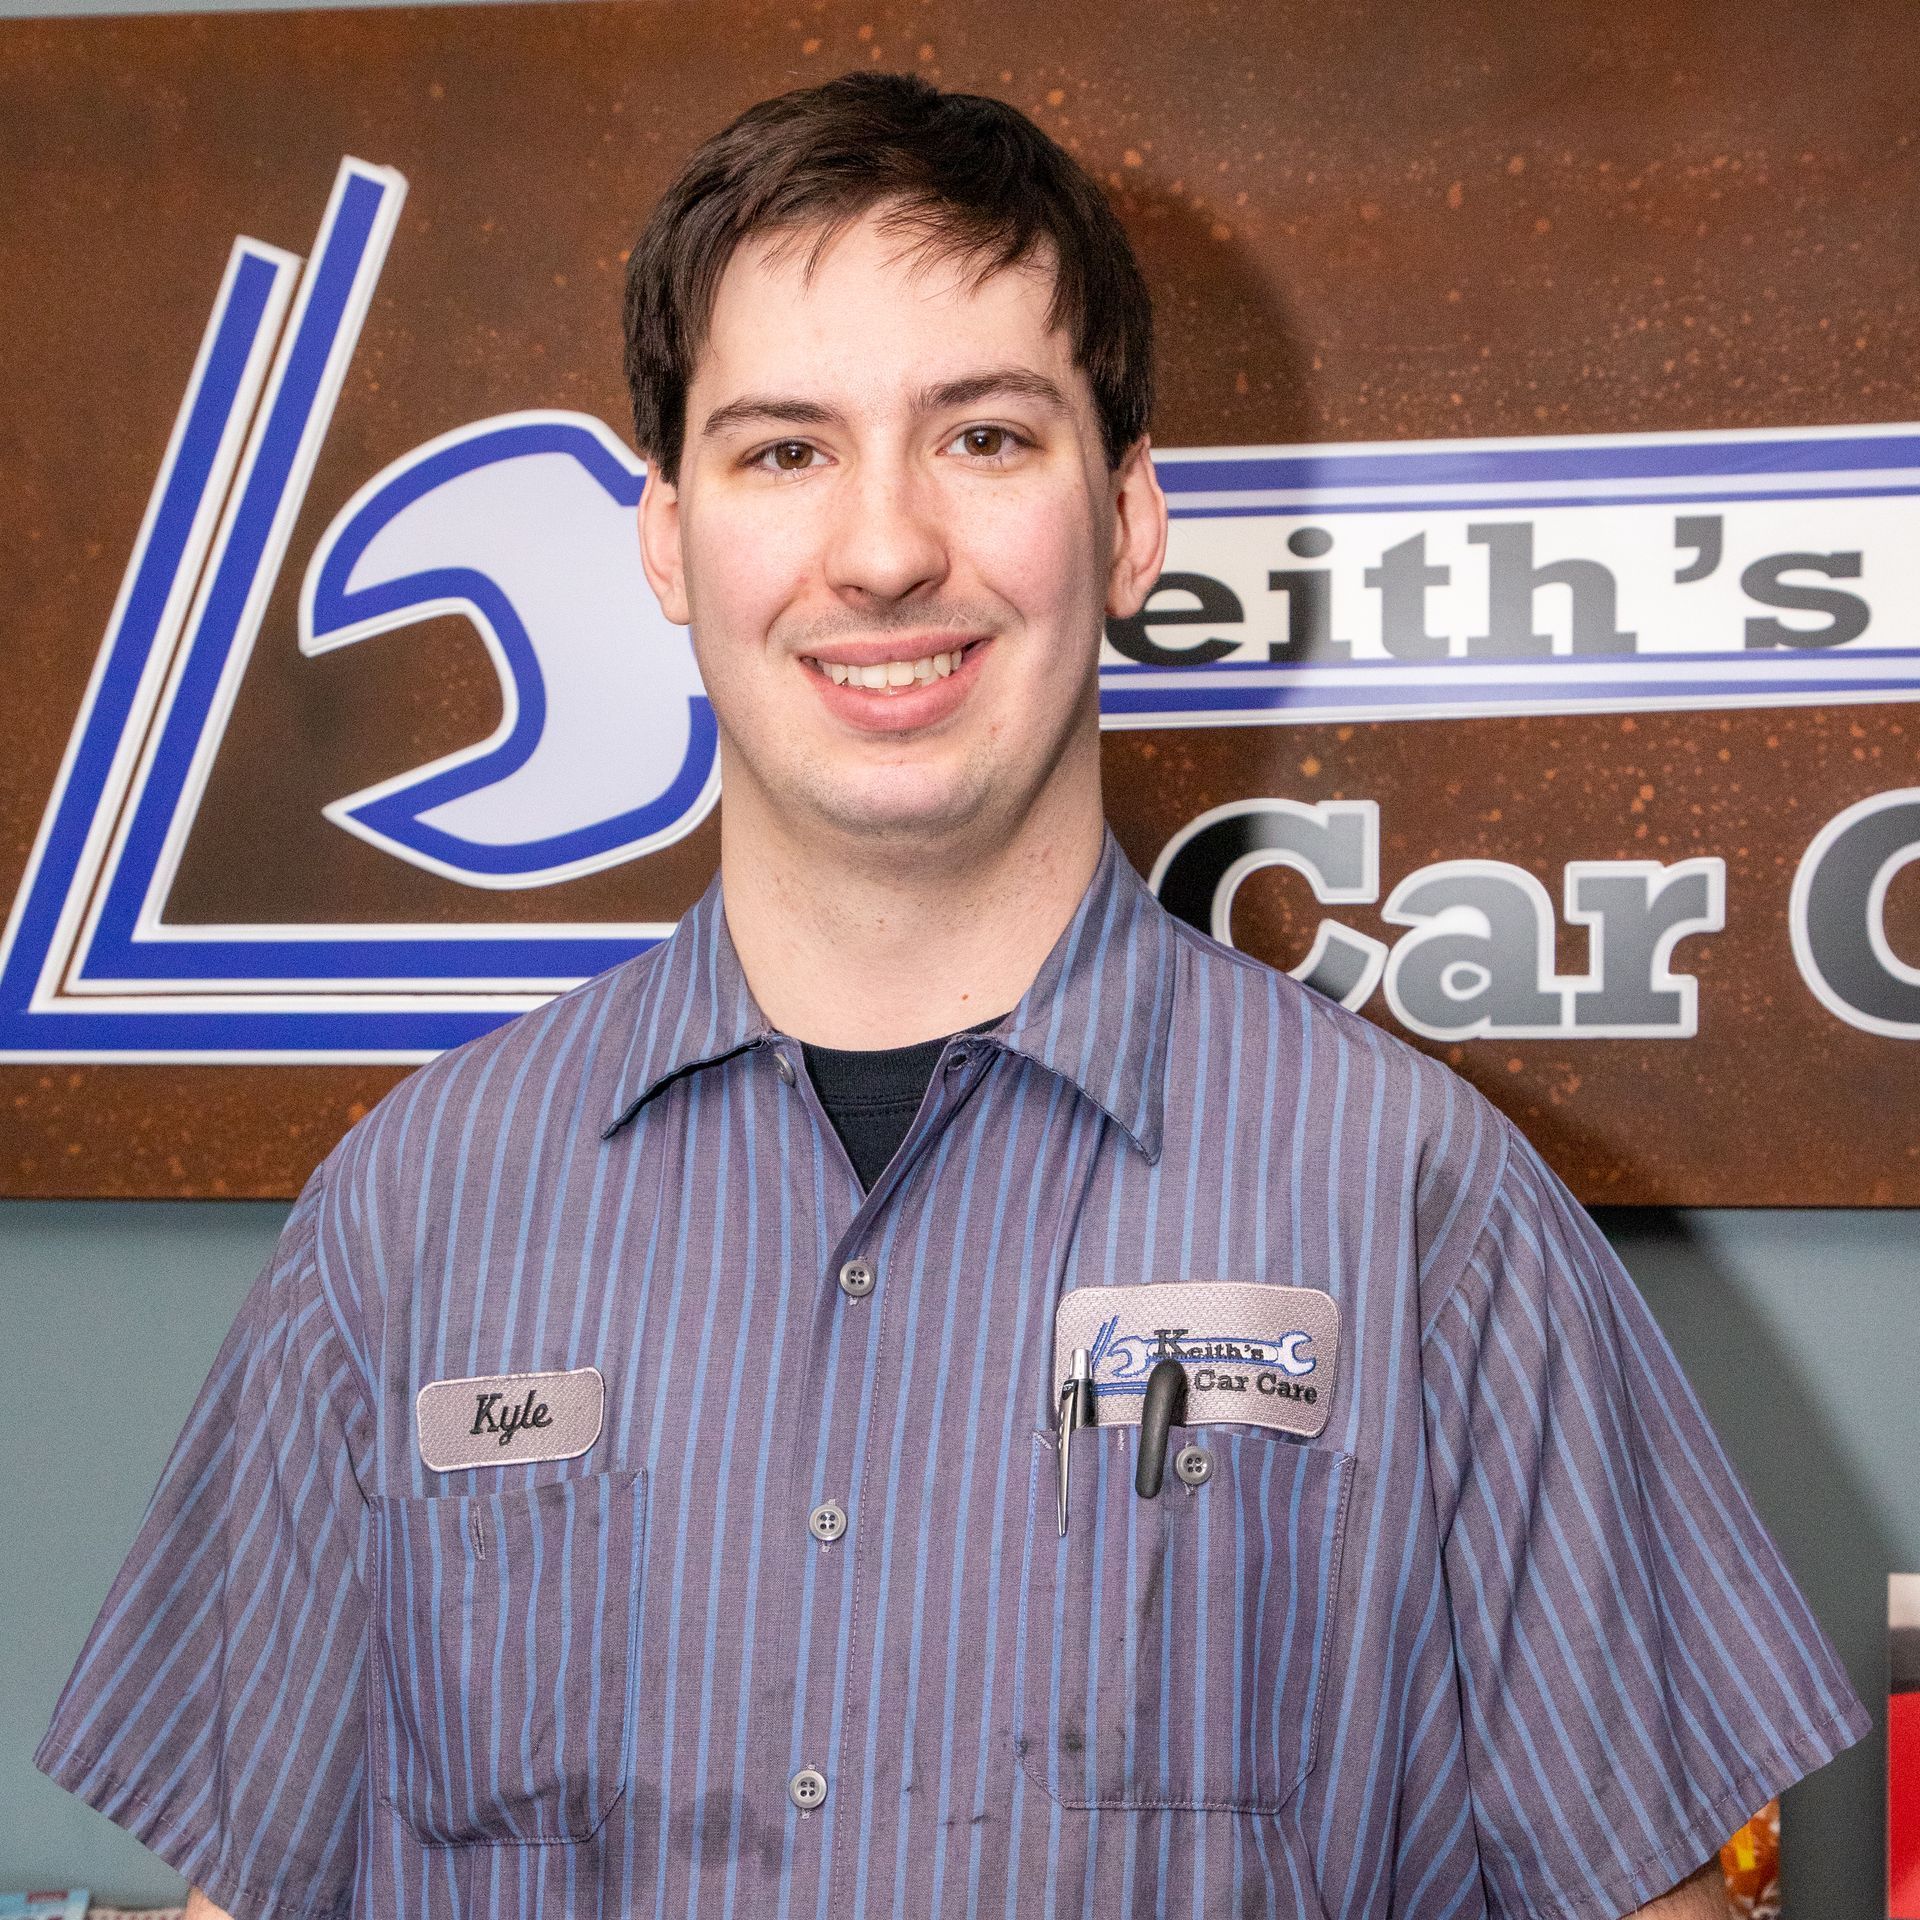 Kyle S at Keith's Car Care in Oswego, IL